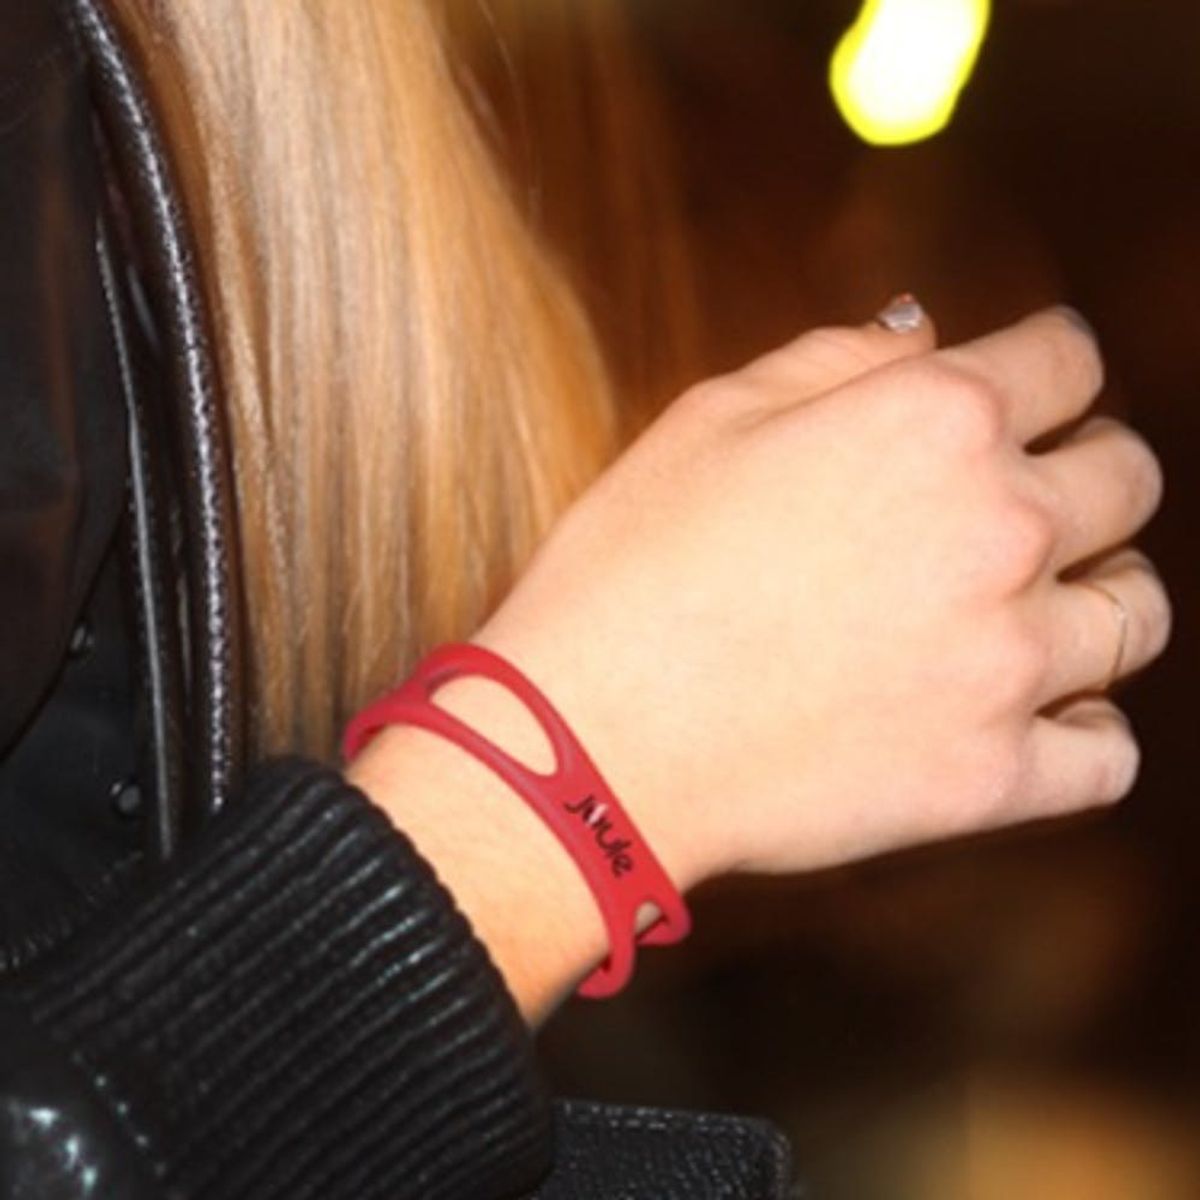 This Bracelet Will Let You Absorb Caffeine Through Your Skin